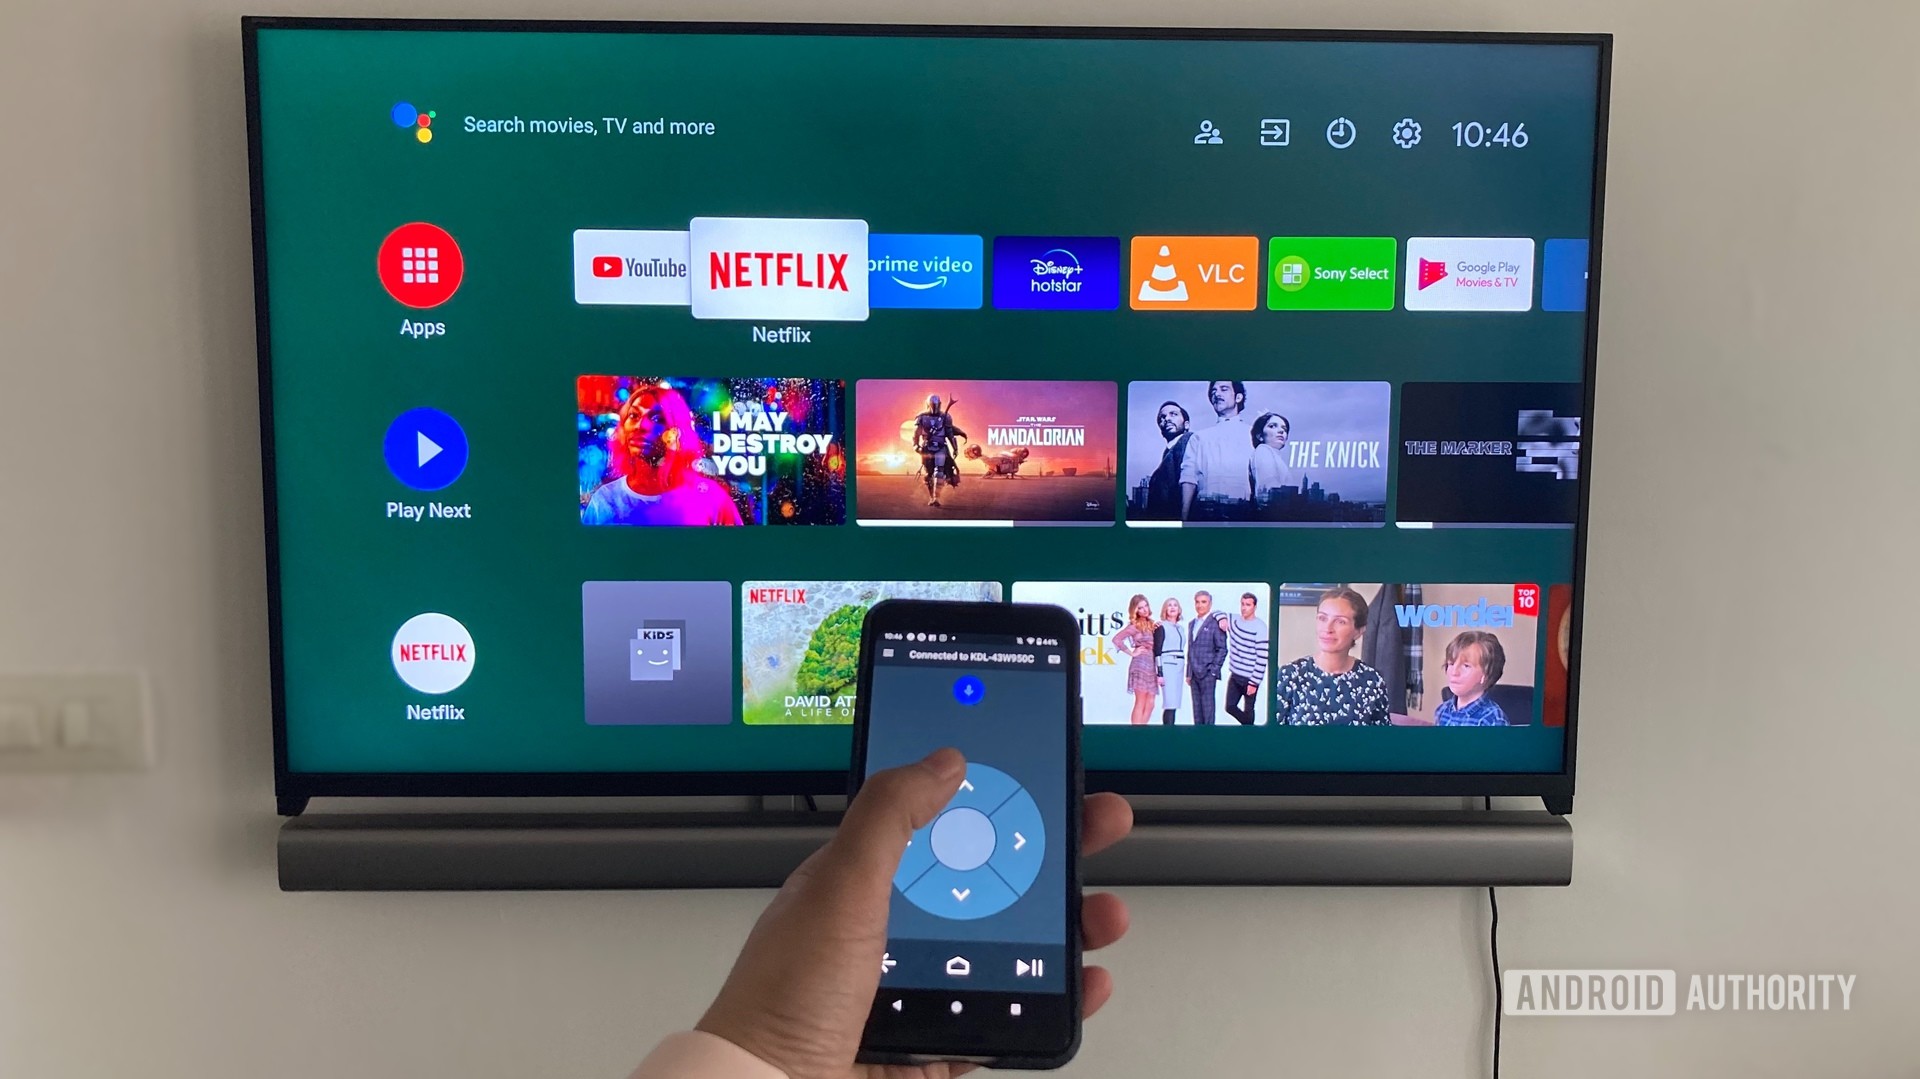 Lounge instead Laziness How to use your phone to control your Android TV wirelessly